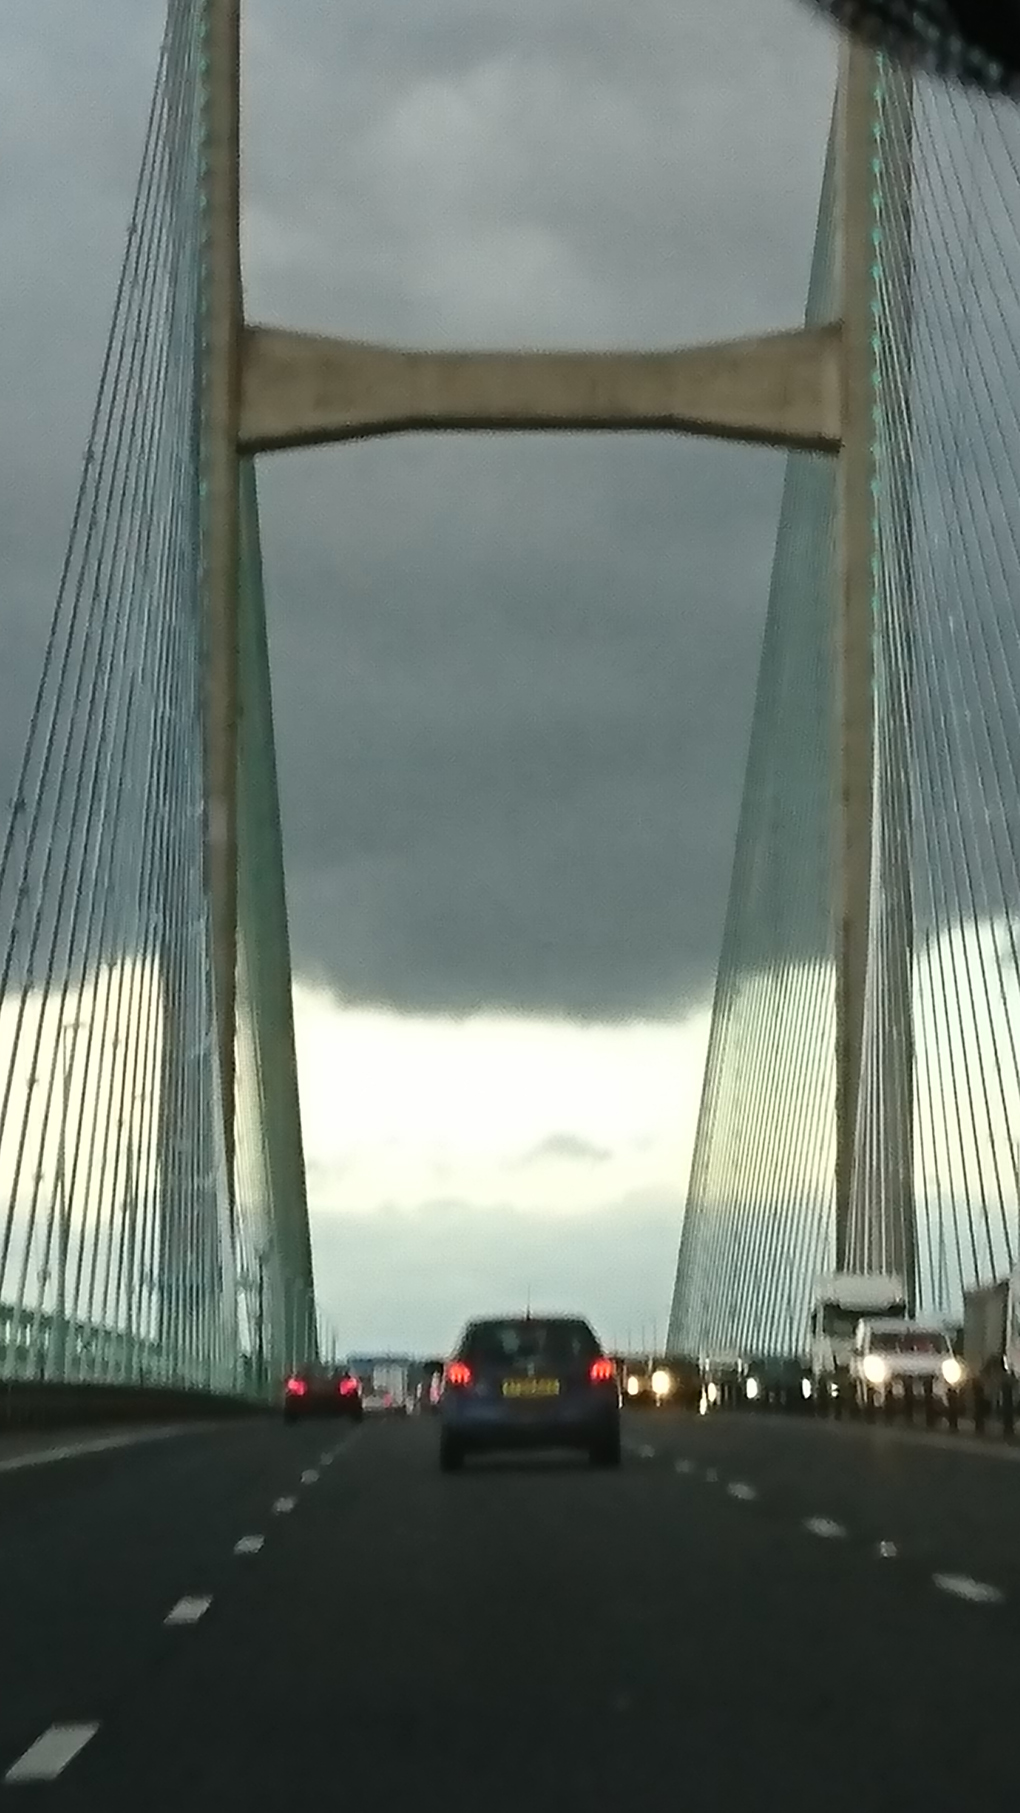 Heading home after house hunting we et this sight as we reached the Severn Bridge heading to Bristol - a threatening sight of a heavy huge black cloud practically covering the road ahead. Was this a portent of things to come!!! I hope not.